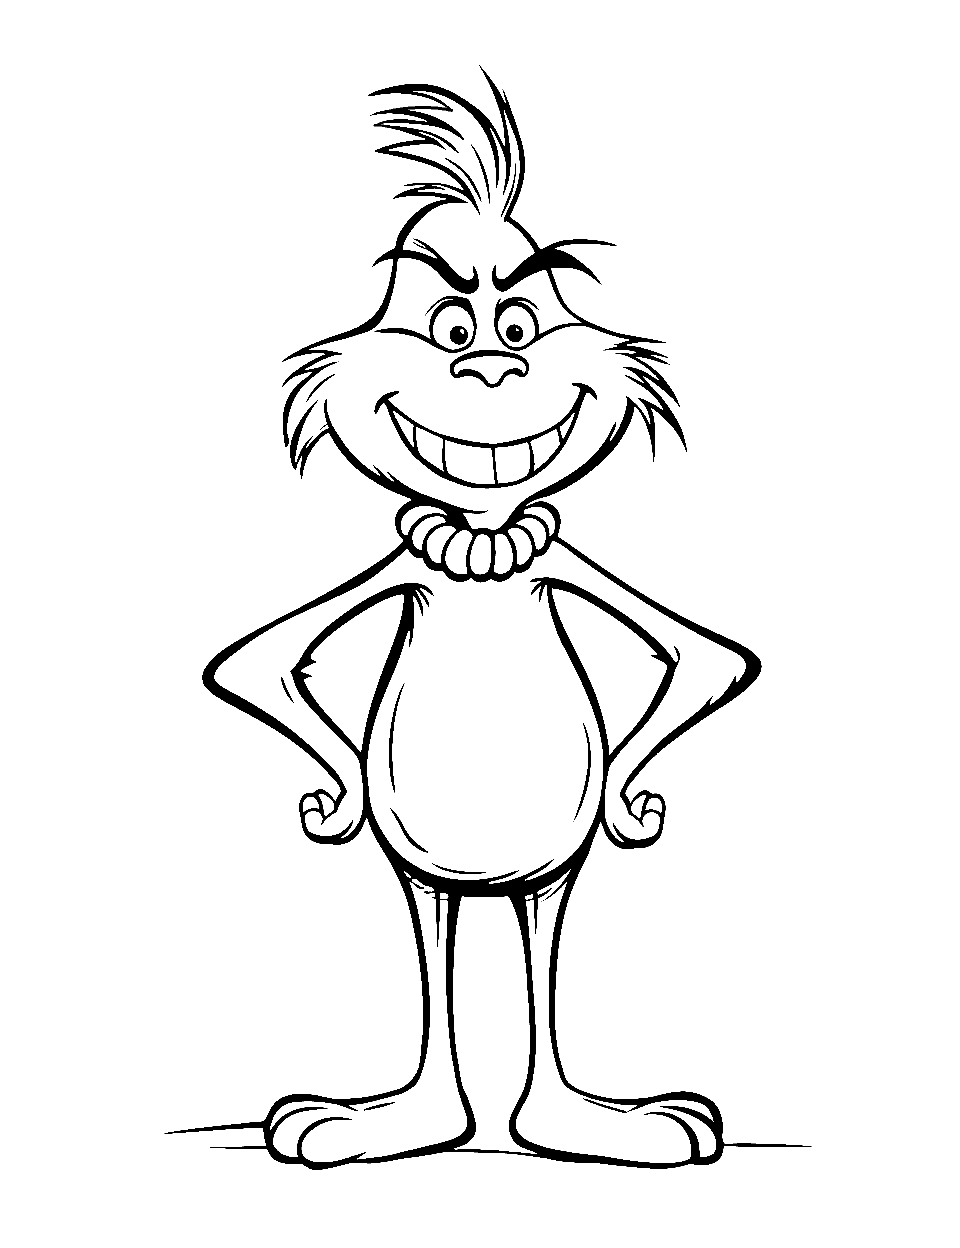 Grinch’s Mischievous Smile Coloring Page - The Grinch is sporting a mischievous smile, thinking about stealing Christmas with his hands on his hips.